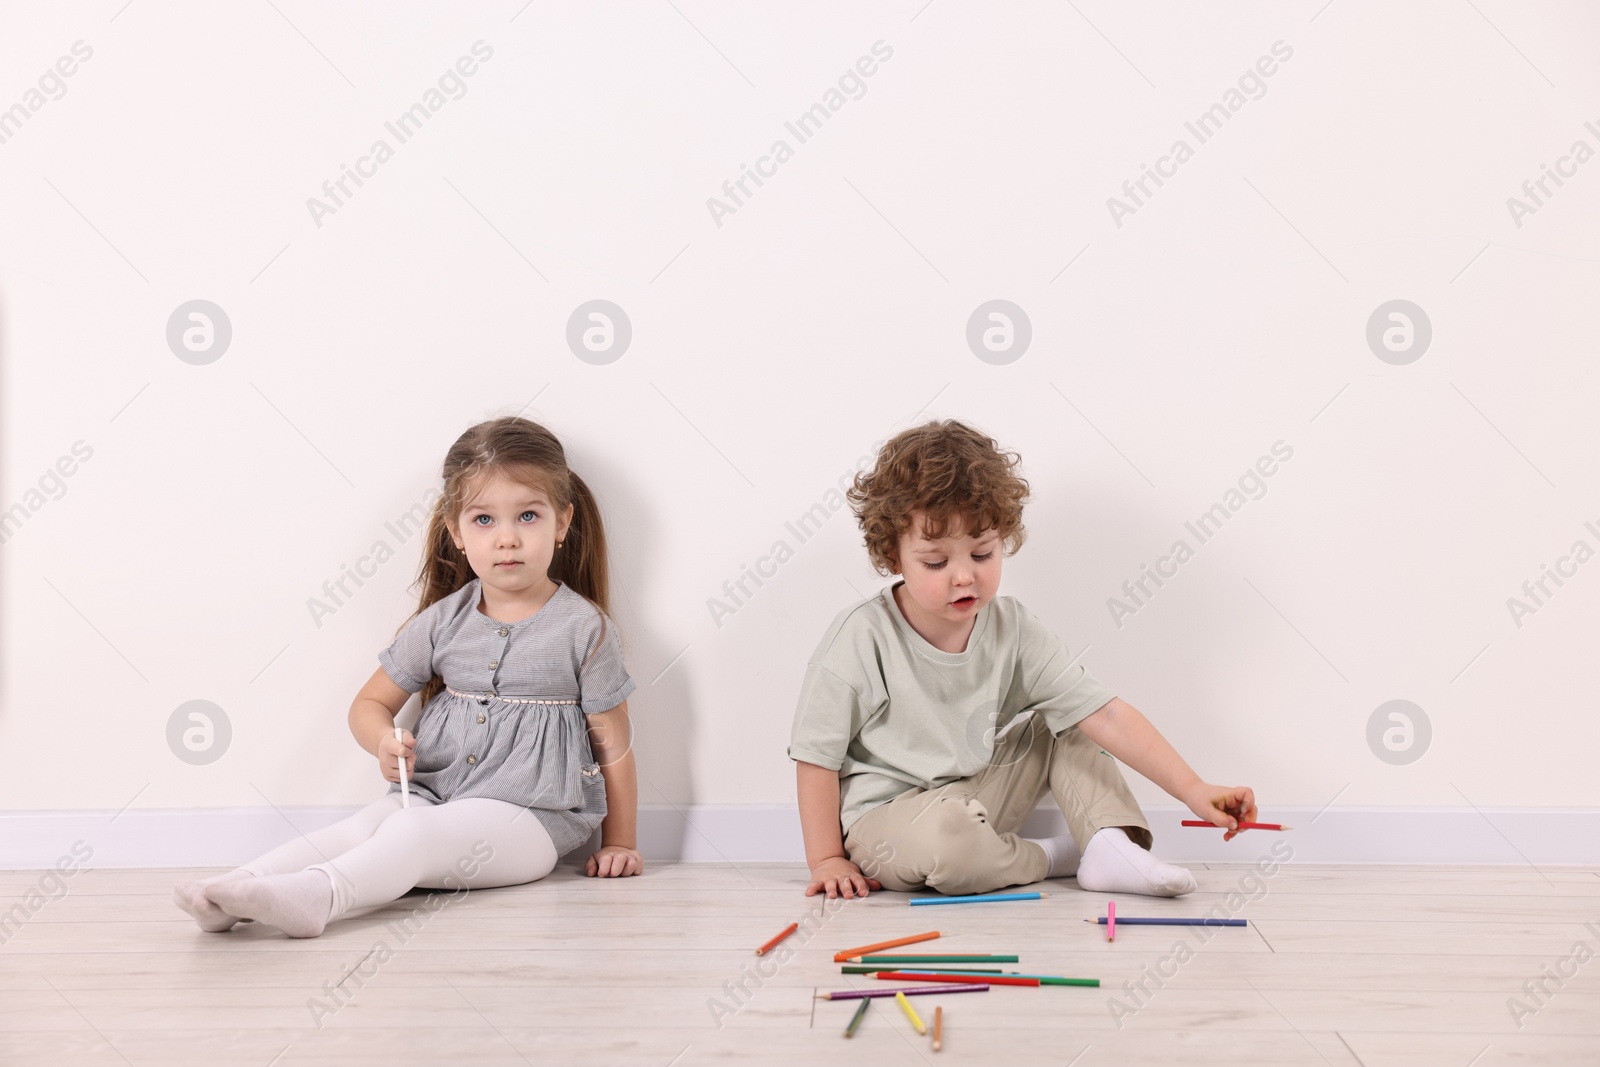 Photo of Cute little children with colorful pencils near white wall indoors